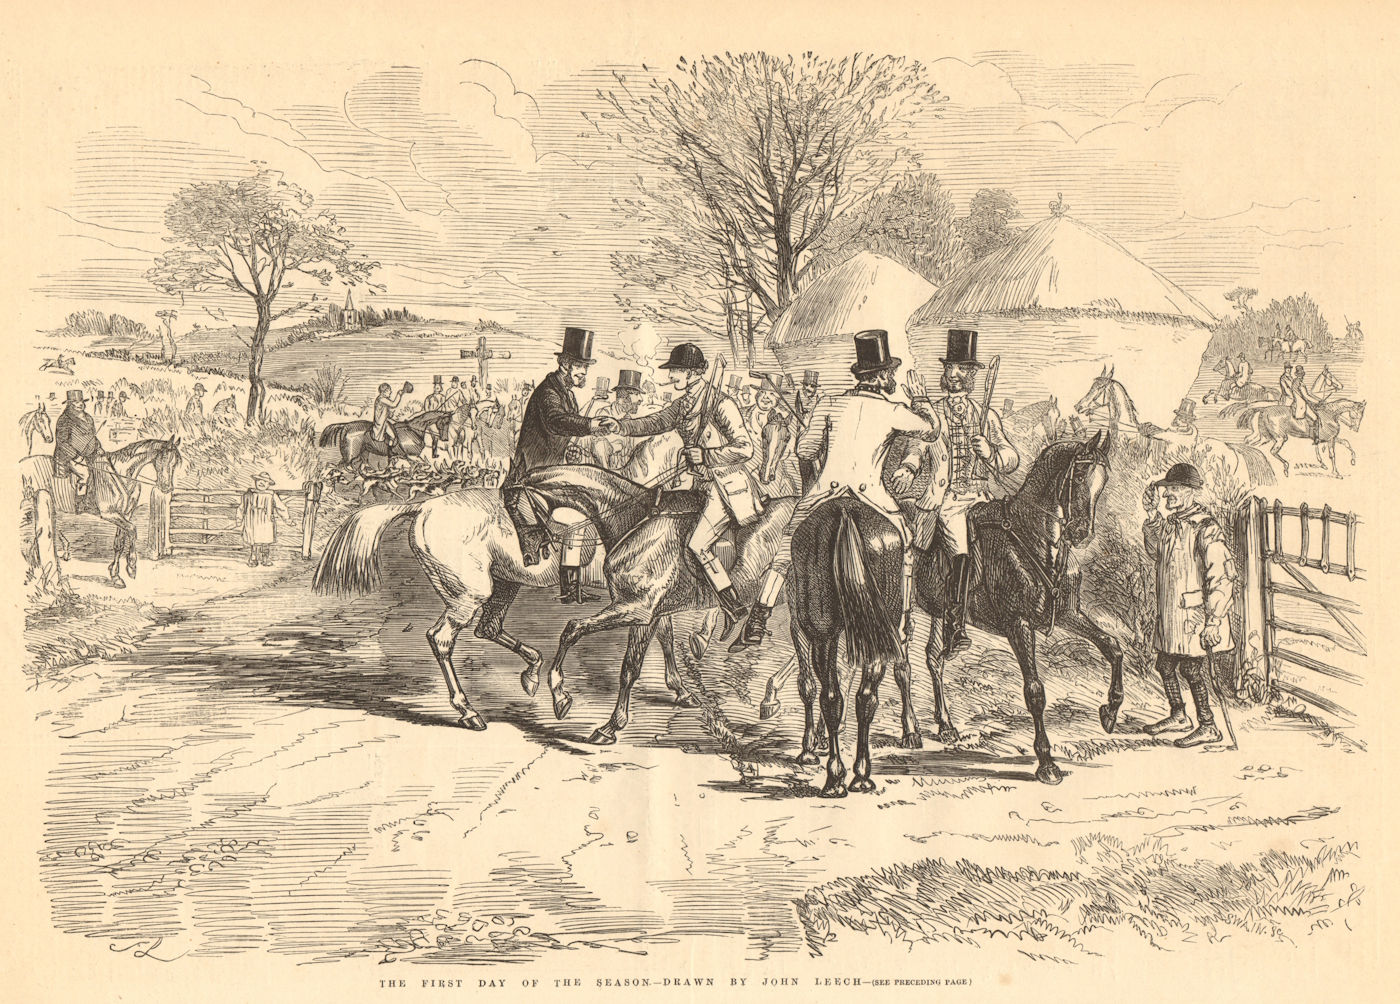 Associate Product The first day of the season - drawn by John Leech. Hunting. Hunting 1856 print